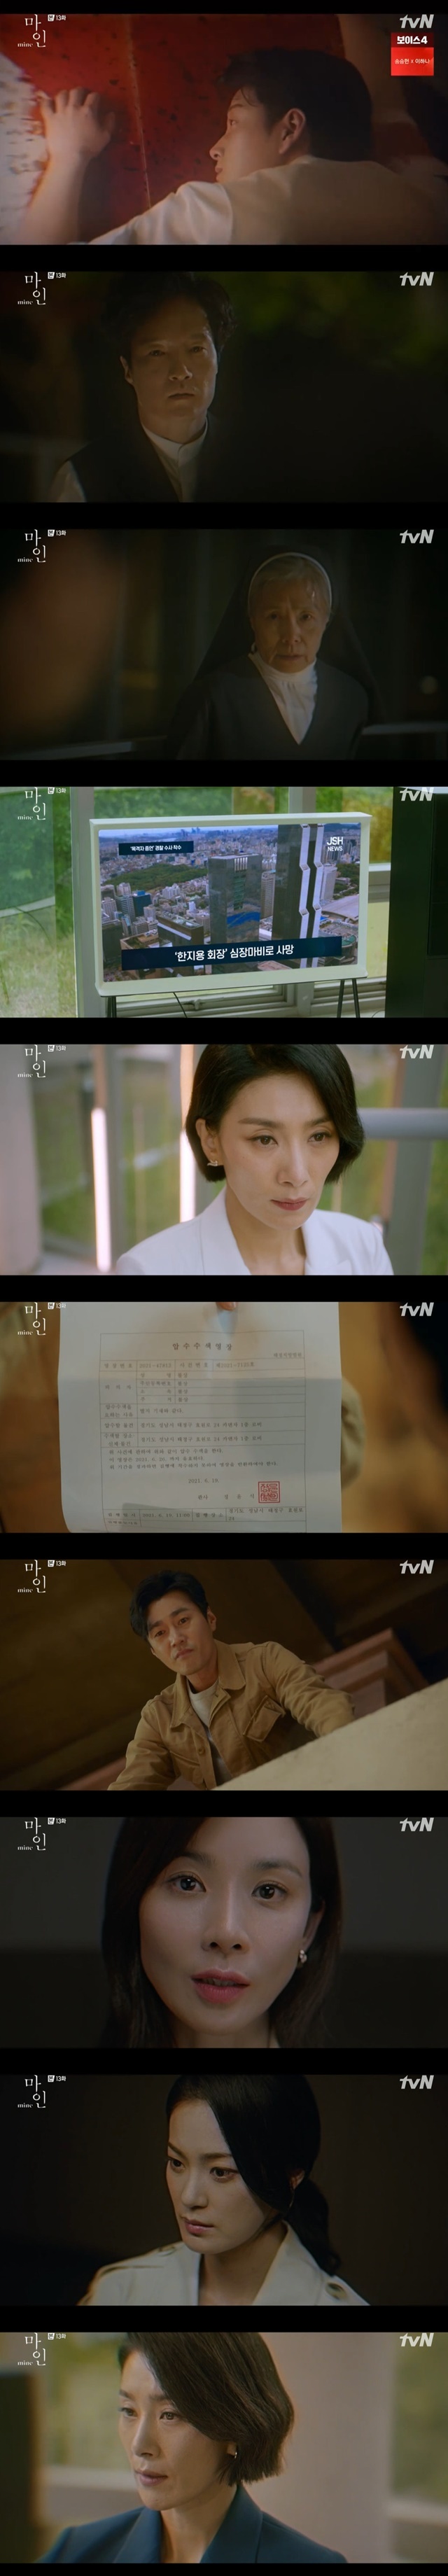 After Lee Hyeonwuks death, Lee Joong-ok was depared and Lee Bo-young lost Memory, and the truth was veiled.In the 13th episode of TVNs Saturday drama Mine, which aired on June 19, the investigation into the murder of Han Ji-yong (Lee Hyeonwuk), was started.Ten days before Han Ji-yongs death, Lee Hye-jin (Kang Ja-kyung/Ok Ja-yeon) was threatened with kidnapping and suspected Han Ji-yong (Lee Hyeonwuk) behind him, and Seo Hee-soo (Lee Bo-young) went back into the house to protect Lee Hye-jin and made him a tutor for his son Han Ha-jun (Jung Hyun-joon).Han Ji-yong continued to say that Lee Hye-jin killed Seo Hee-soo and raised his son Han Ha-joon.Jeong Seohyun (Kim Seohyun) first confided in her husband, Han Jin-ho (Park Hyeok-kwon), to take away her representative position from Han Ji-yong.Im a sex minority, said Jeong, and if you want to, youll get Han Ji-yong down and divorce him.I think its much better than the sound of a man, said Han Jin-ho, who said he would not divorce her.Jung Seohyun decided to reveal my weaknesses to the media and confront Han Ji-yong, and Han Jin-ho decided to add strength to his wife, Seohyun.Han Jin-ho expressed his intention at the gathering of his family, and his son Han Soo-hyuk (Cha Hak-yeon) also supported his stepmother, Seohyun, who also decided to use his stake in the company to Jeong Seohyun.Han Jin-ho informed his mother Yang Soon-hye (Park Won-sook) that Han Ji-yong was not his fathers biological son, and Yang Soon-hye was angry.Chung Seohyun informed the city president Han (Chung Dong-hwan) that Han Ji-yong had killed his dog, Kwak Soo-chang, and asked for cooperation. Han was surprised that Ji-yong was a bad child enough to kill people.In the meantime, Kwak Hyun-dong, the brother of Kwak Soo-chang, who died, found consciousness at the hospital, and Seo Hee-soo pushed Han Ji-yong after taking Kwak Hyun-dong to another place.Han Ji-yong began to search for Kwak Hyun-dong and tried to kidnap his son Han Ha-joon to prevent studying abroad.Lee asked for help from Jeong Seohyun, who suggested to Han Ji-yongs secretary that he stand behind me, saying, Han Ji-yong is over.Jung Seohyun found Han Ha-joon through Han Ji-yongs secretary, and the secretary made Han Ha-juns cell phone look like a location tracker.Han Jin-ho enticed Kim Sung-tae to give Blue DIA to kill Han Ji-yong.Hanjin said he would help sell Blue DIA and said he would receive 20 billion won, and advised him not to return to Monaco immediately after the murder of Han Ji-yong.In the meantime, Han Ji-yong suspected Kim Sung-tae as a person who took pictures of the dogs from my cell phone.